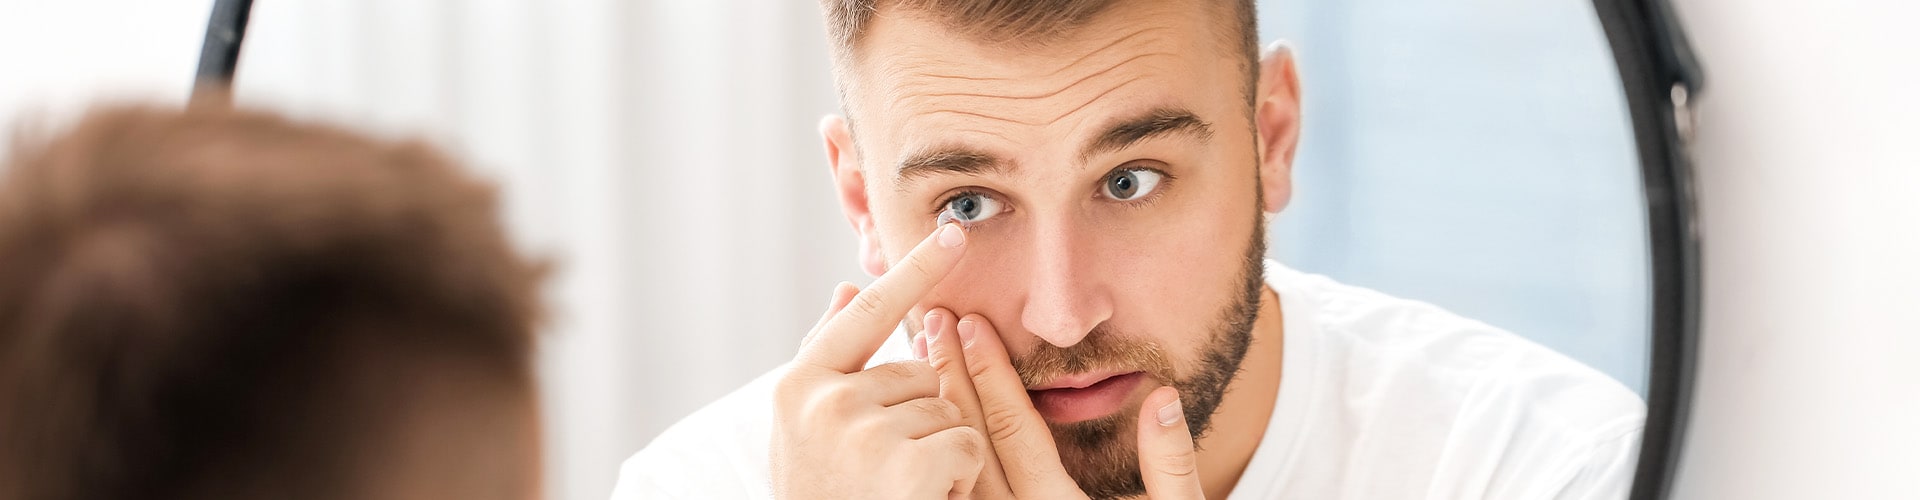 man putting in a contact lens